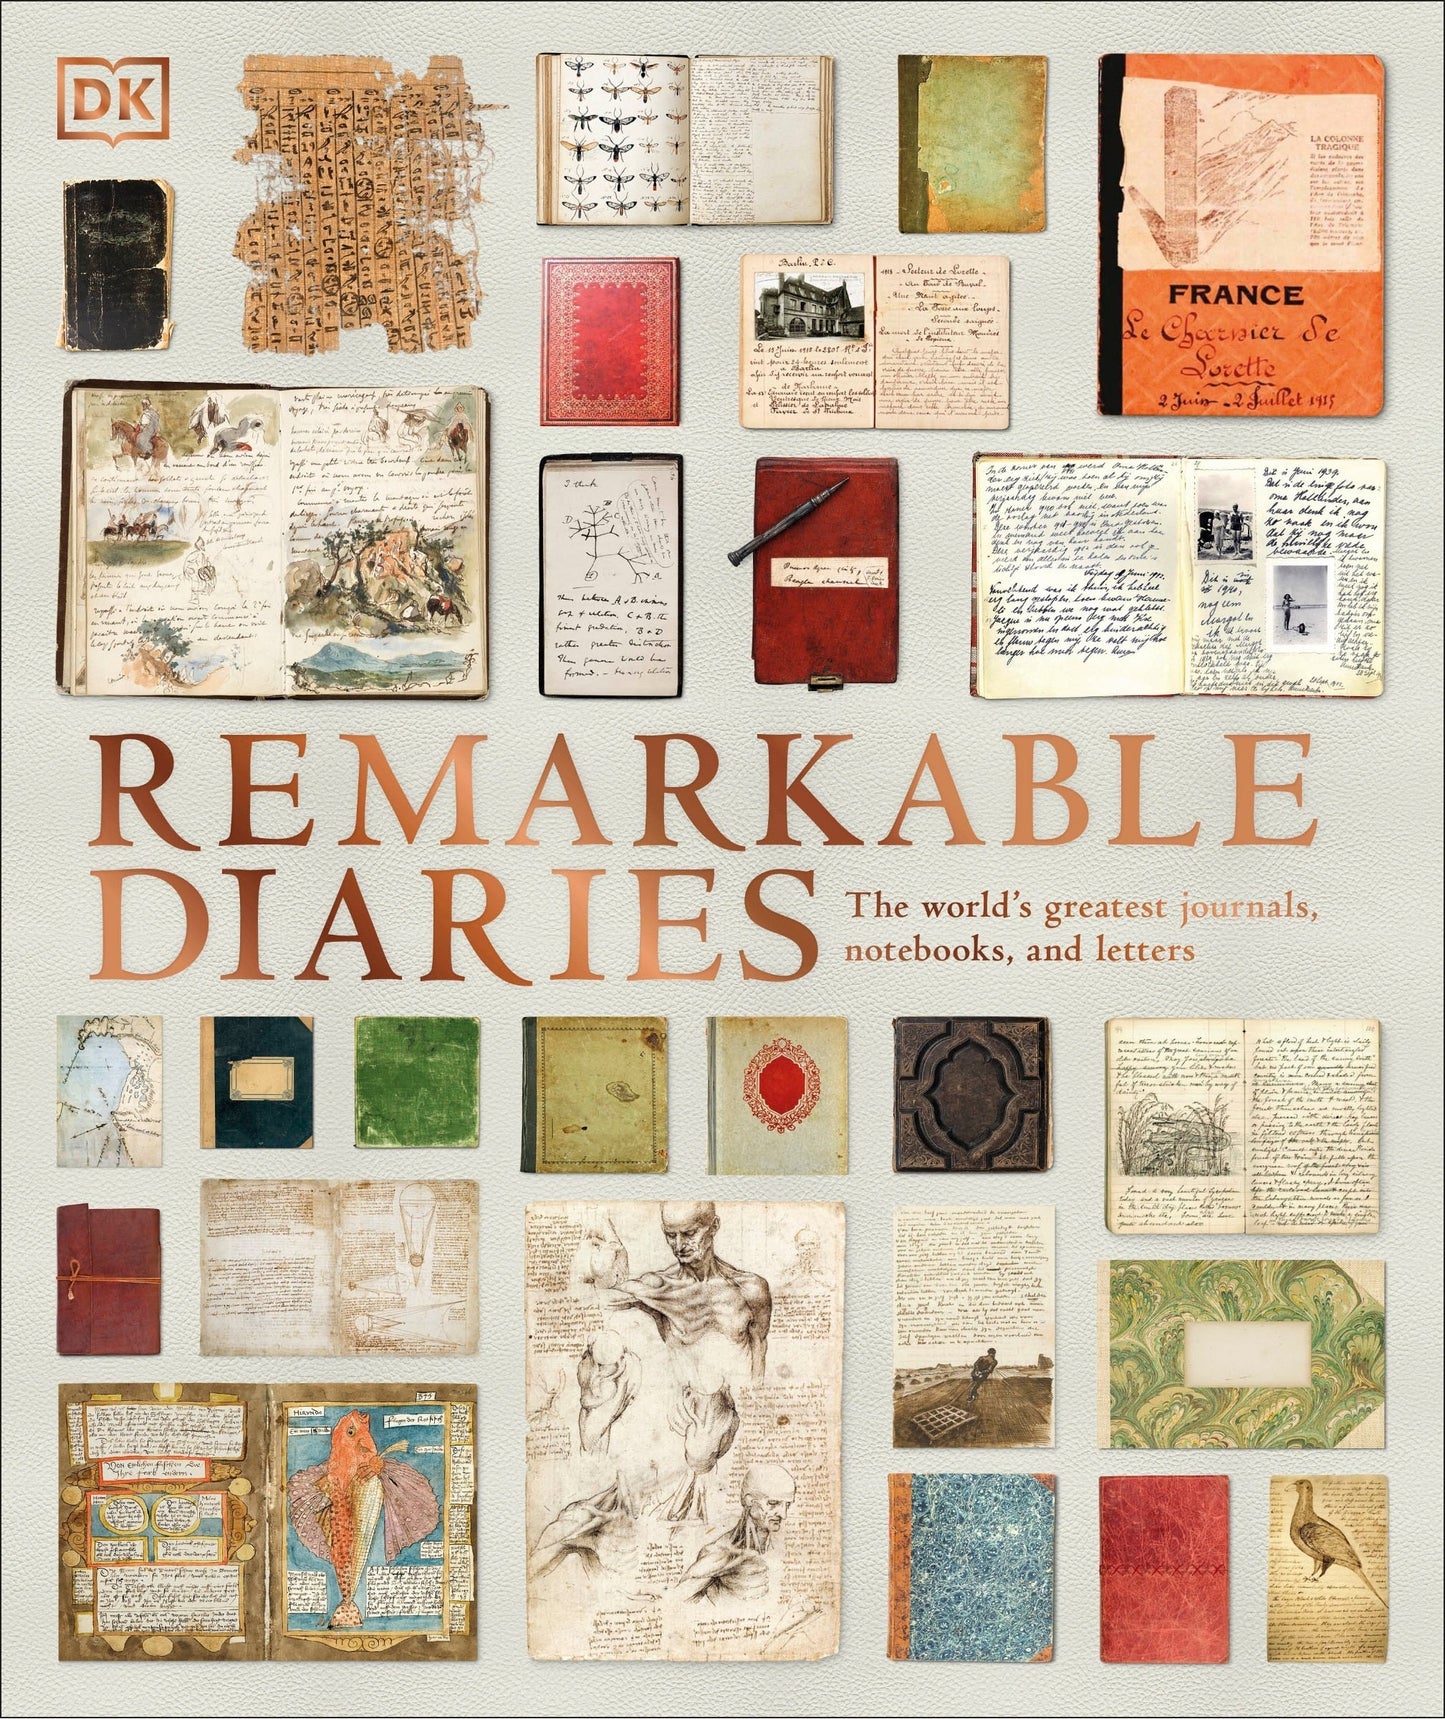 Remarkable Diaries: The World's Greatest Diaries, Journals, Notebooks, & Letters - Dk (Hardcover)-Literature - Classics / Criticism-9780744020434-BookBizCanada